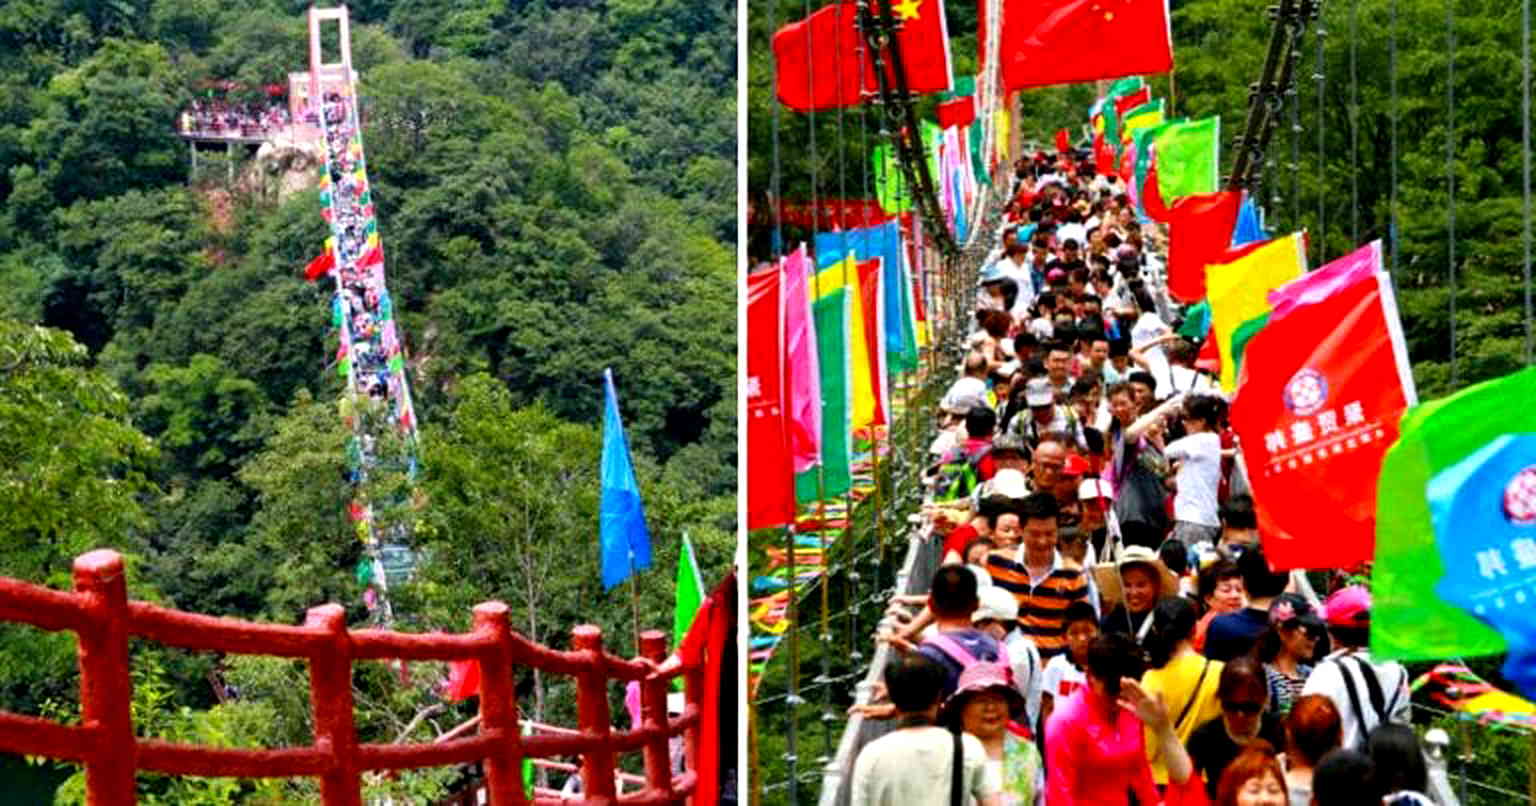 10,000 Chinese Tourists Flood Glass Bridge During Free Admission Weekend